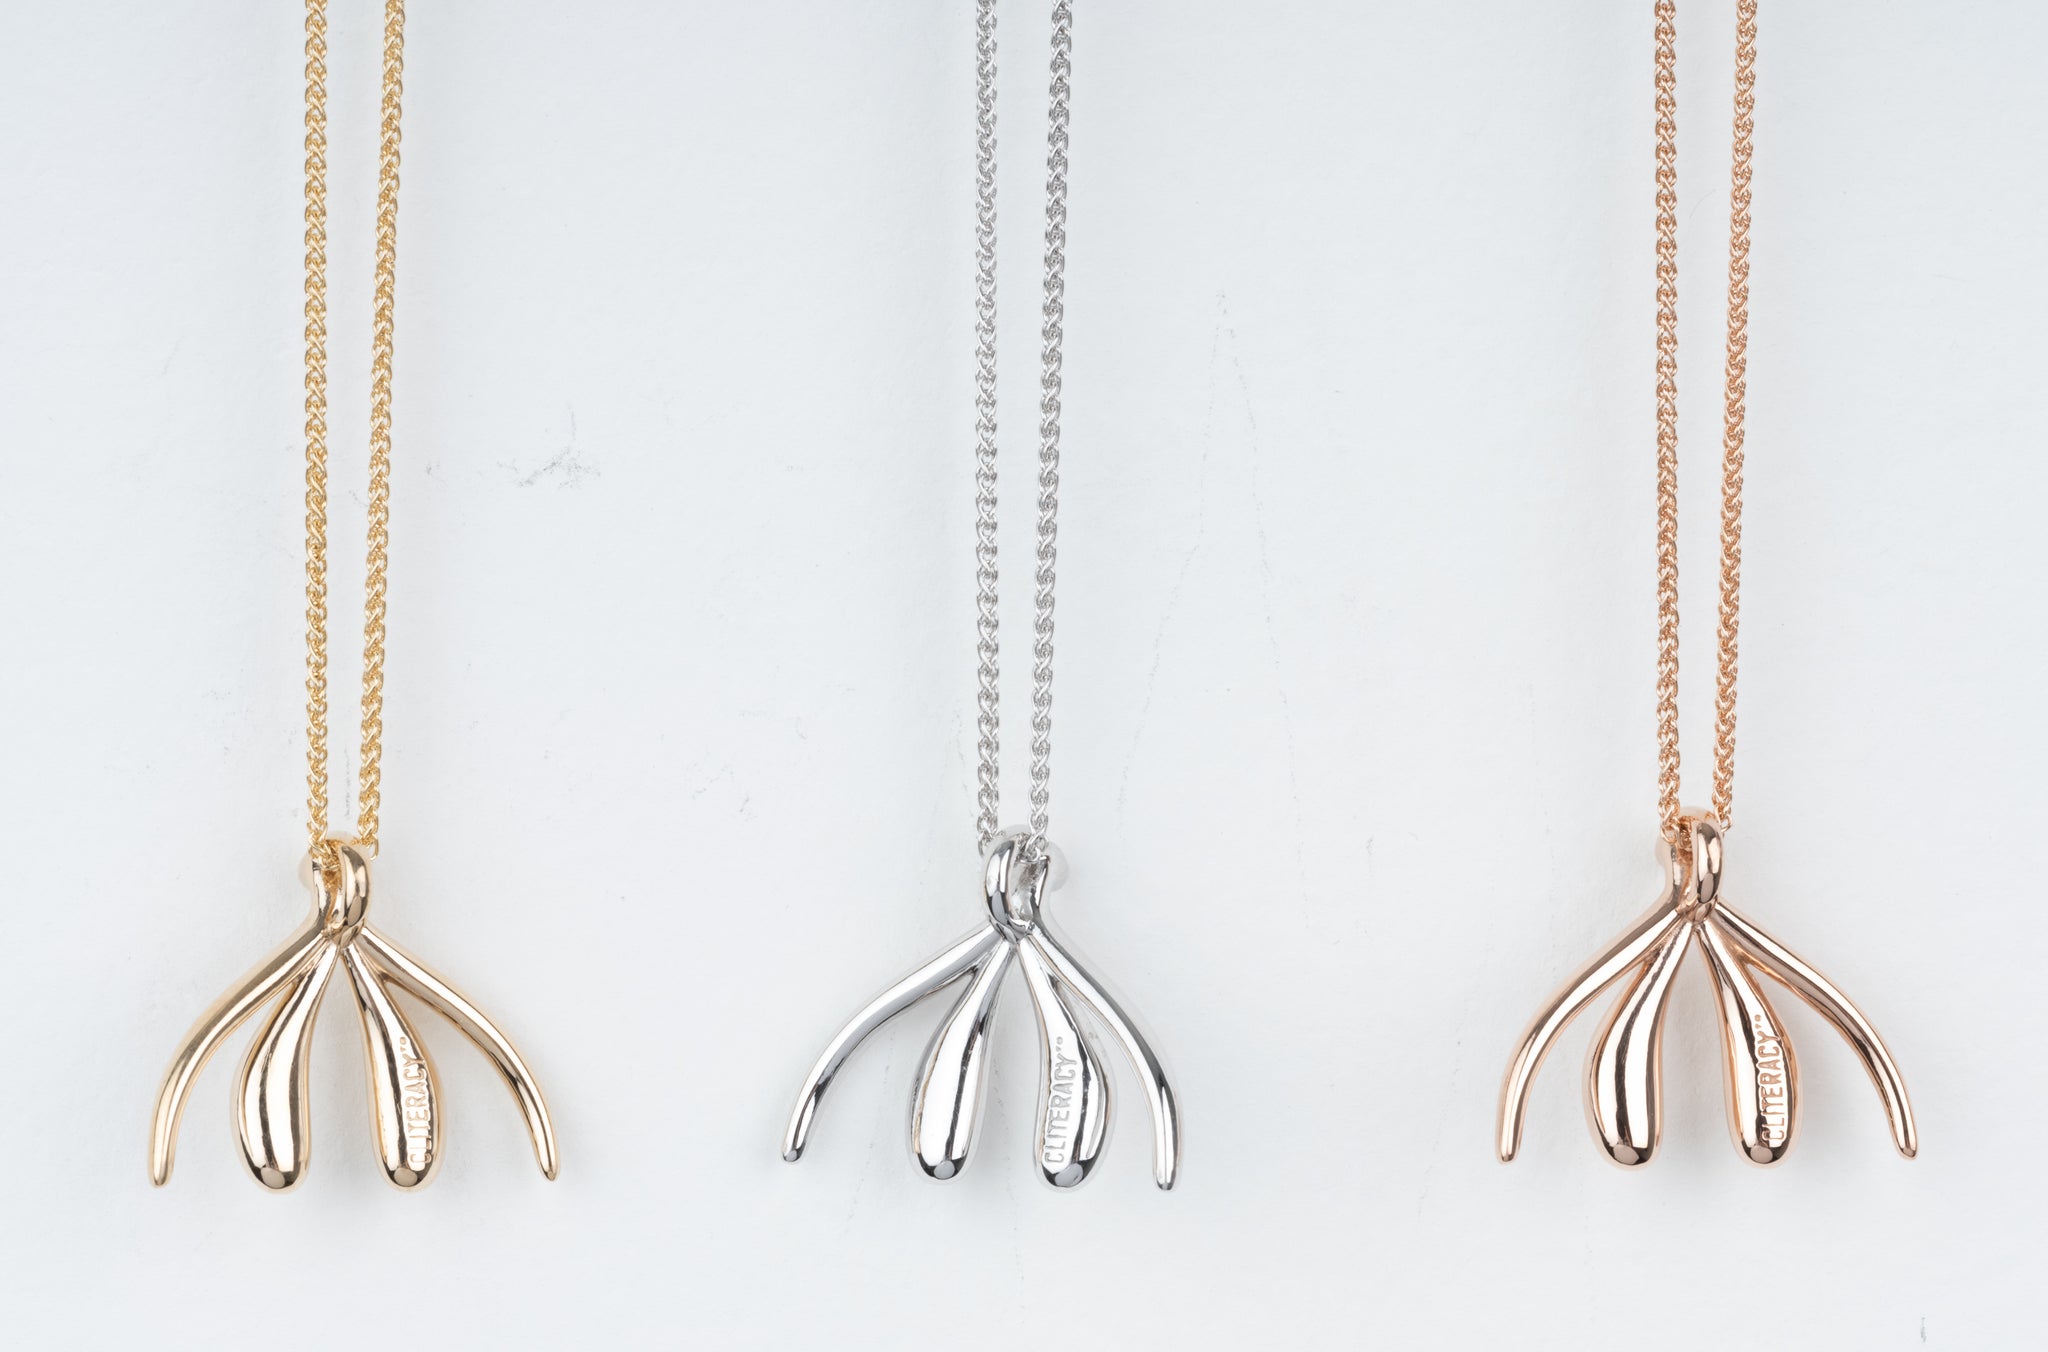 Left to right: 14k Solid Yellow, White and Rose Gold. Unconquorable Necklace (Heirloom) by Sophia Wallace